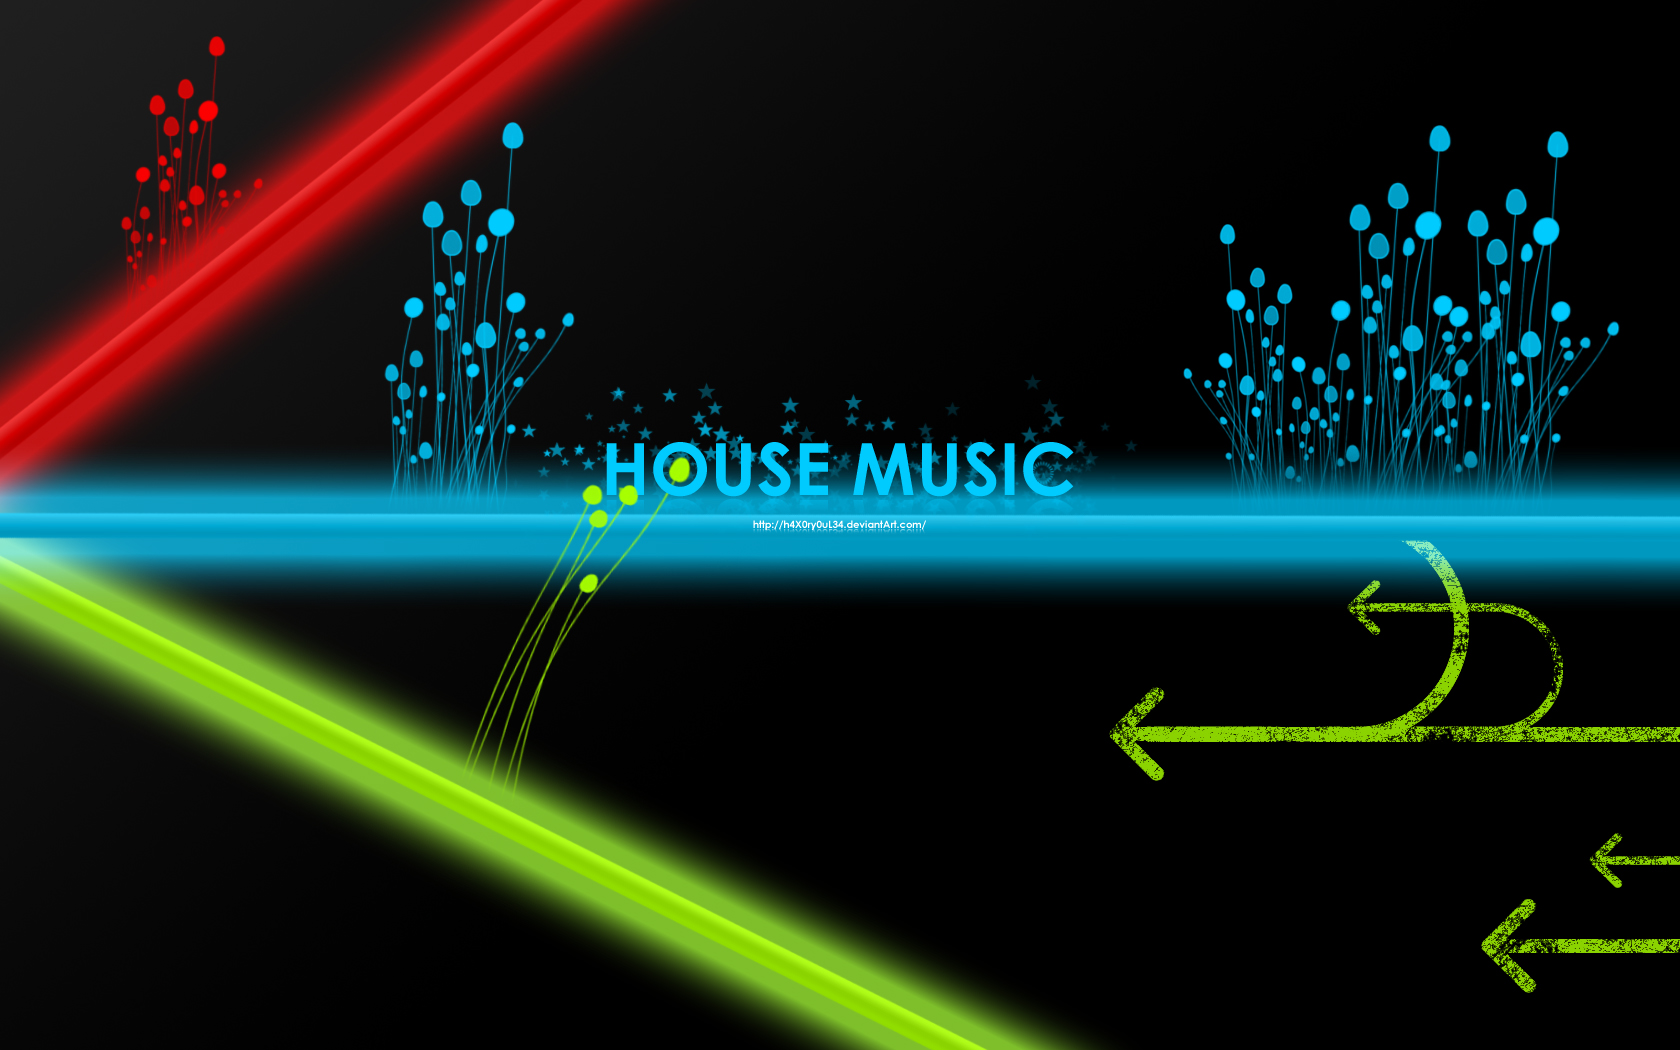 HD Wallpaper House Music By Hxryul Pictures